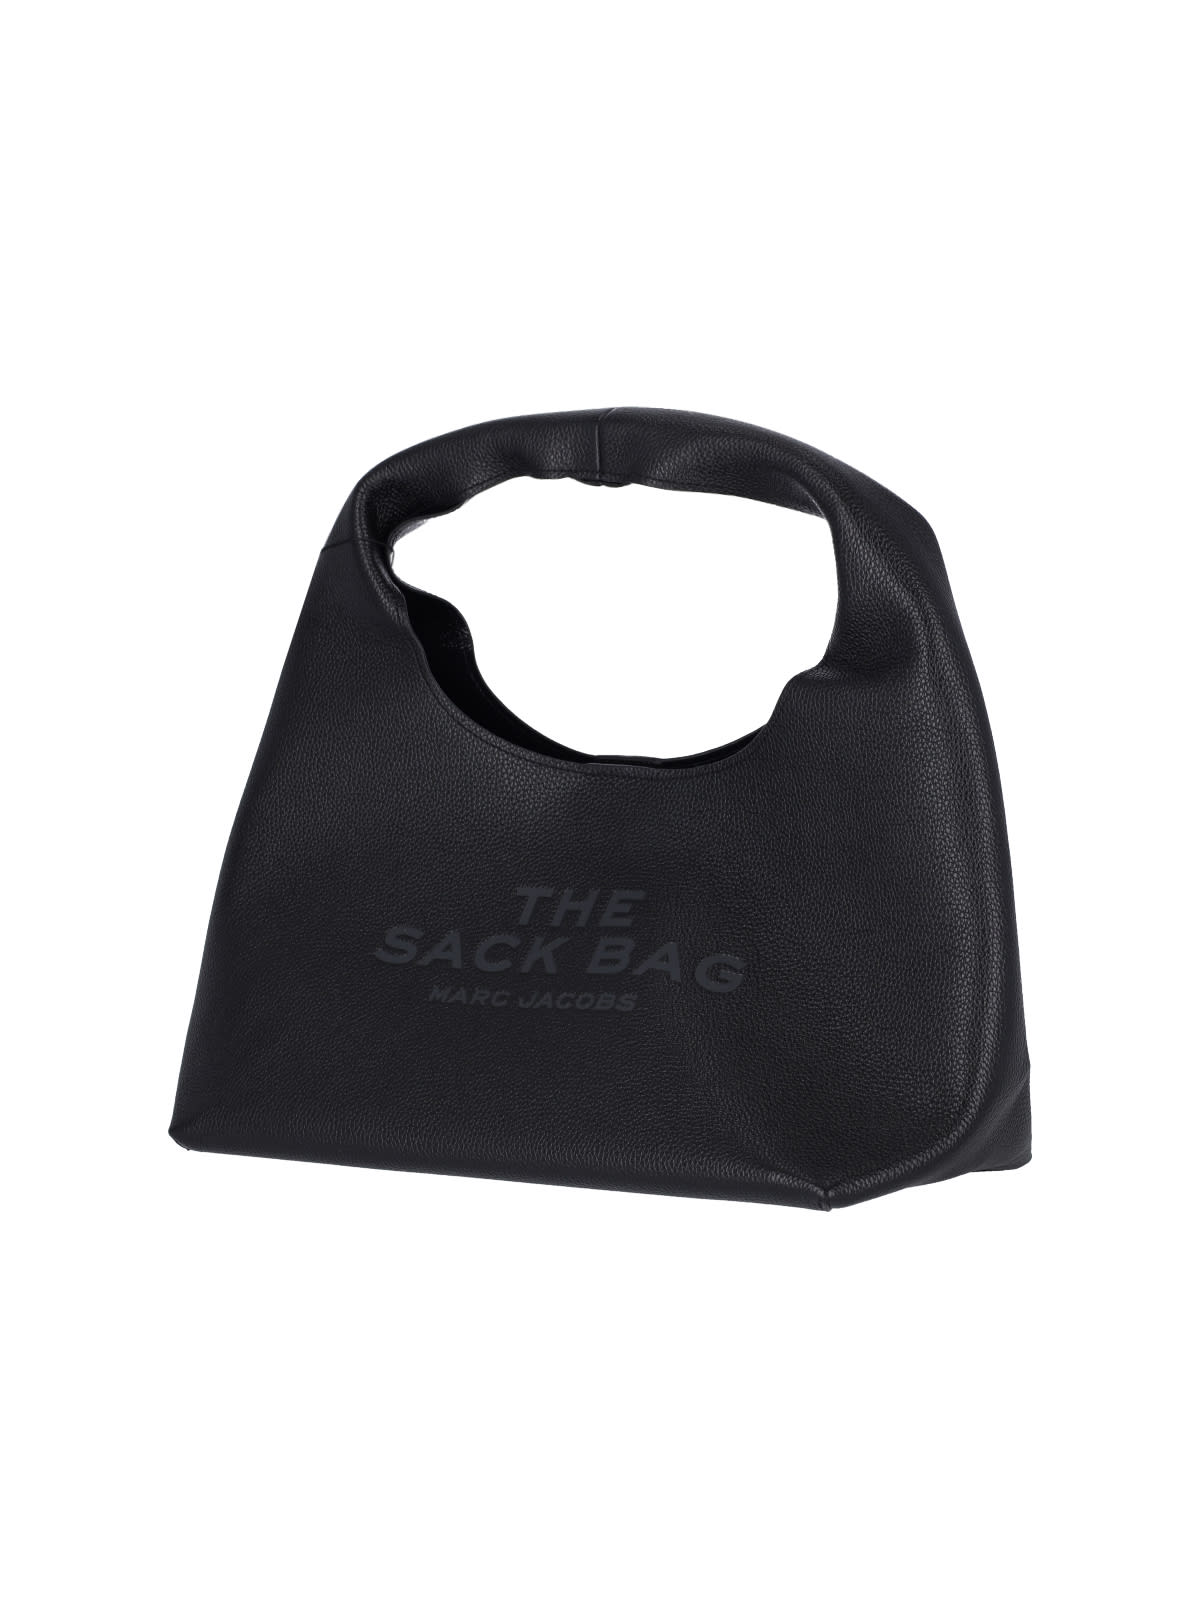 Shop Marc Jacobs The Sac Bag In Black